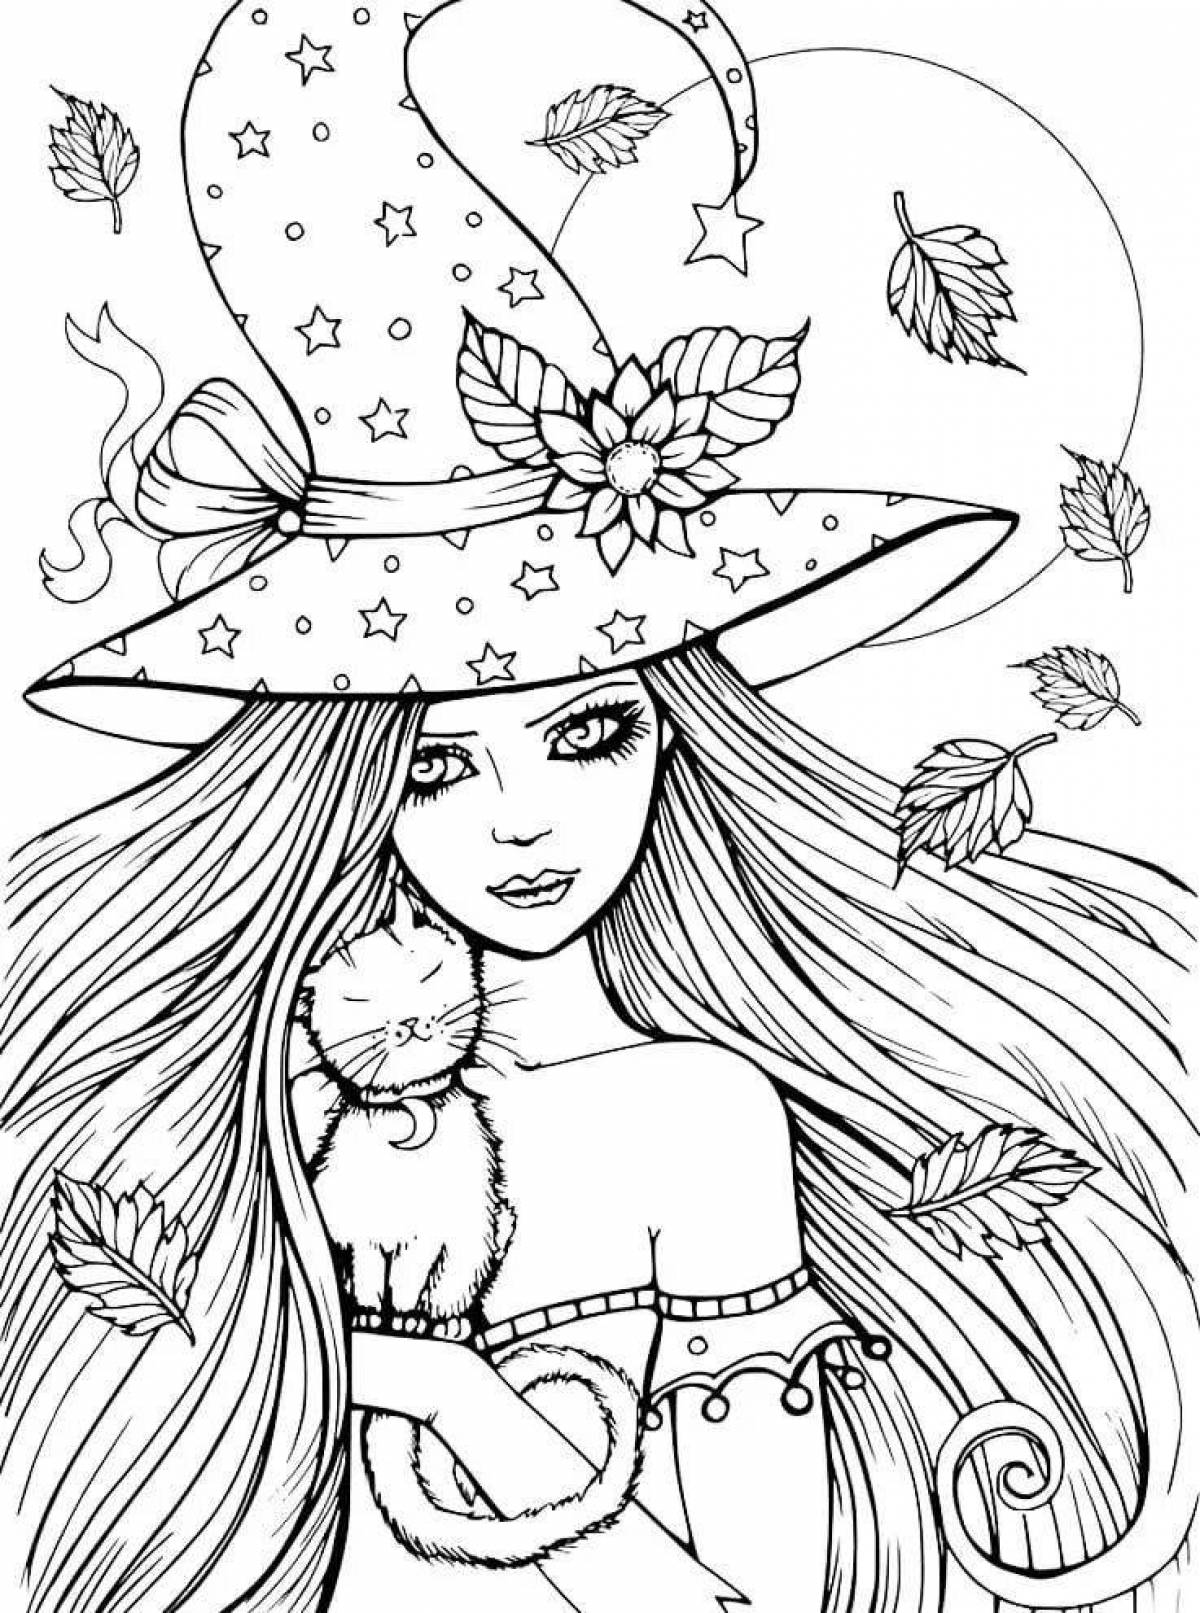 Delightful coloring book for girls 13-14 years old